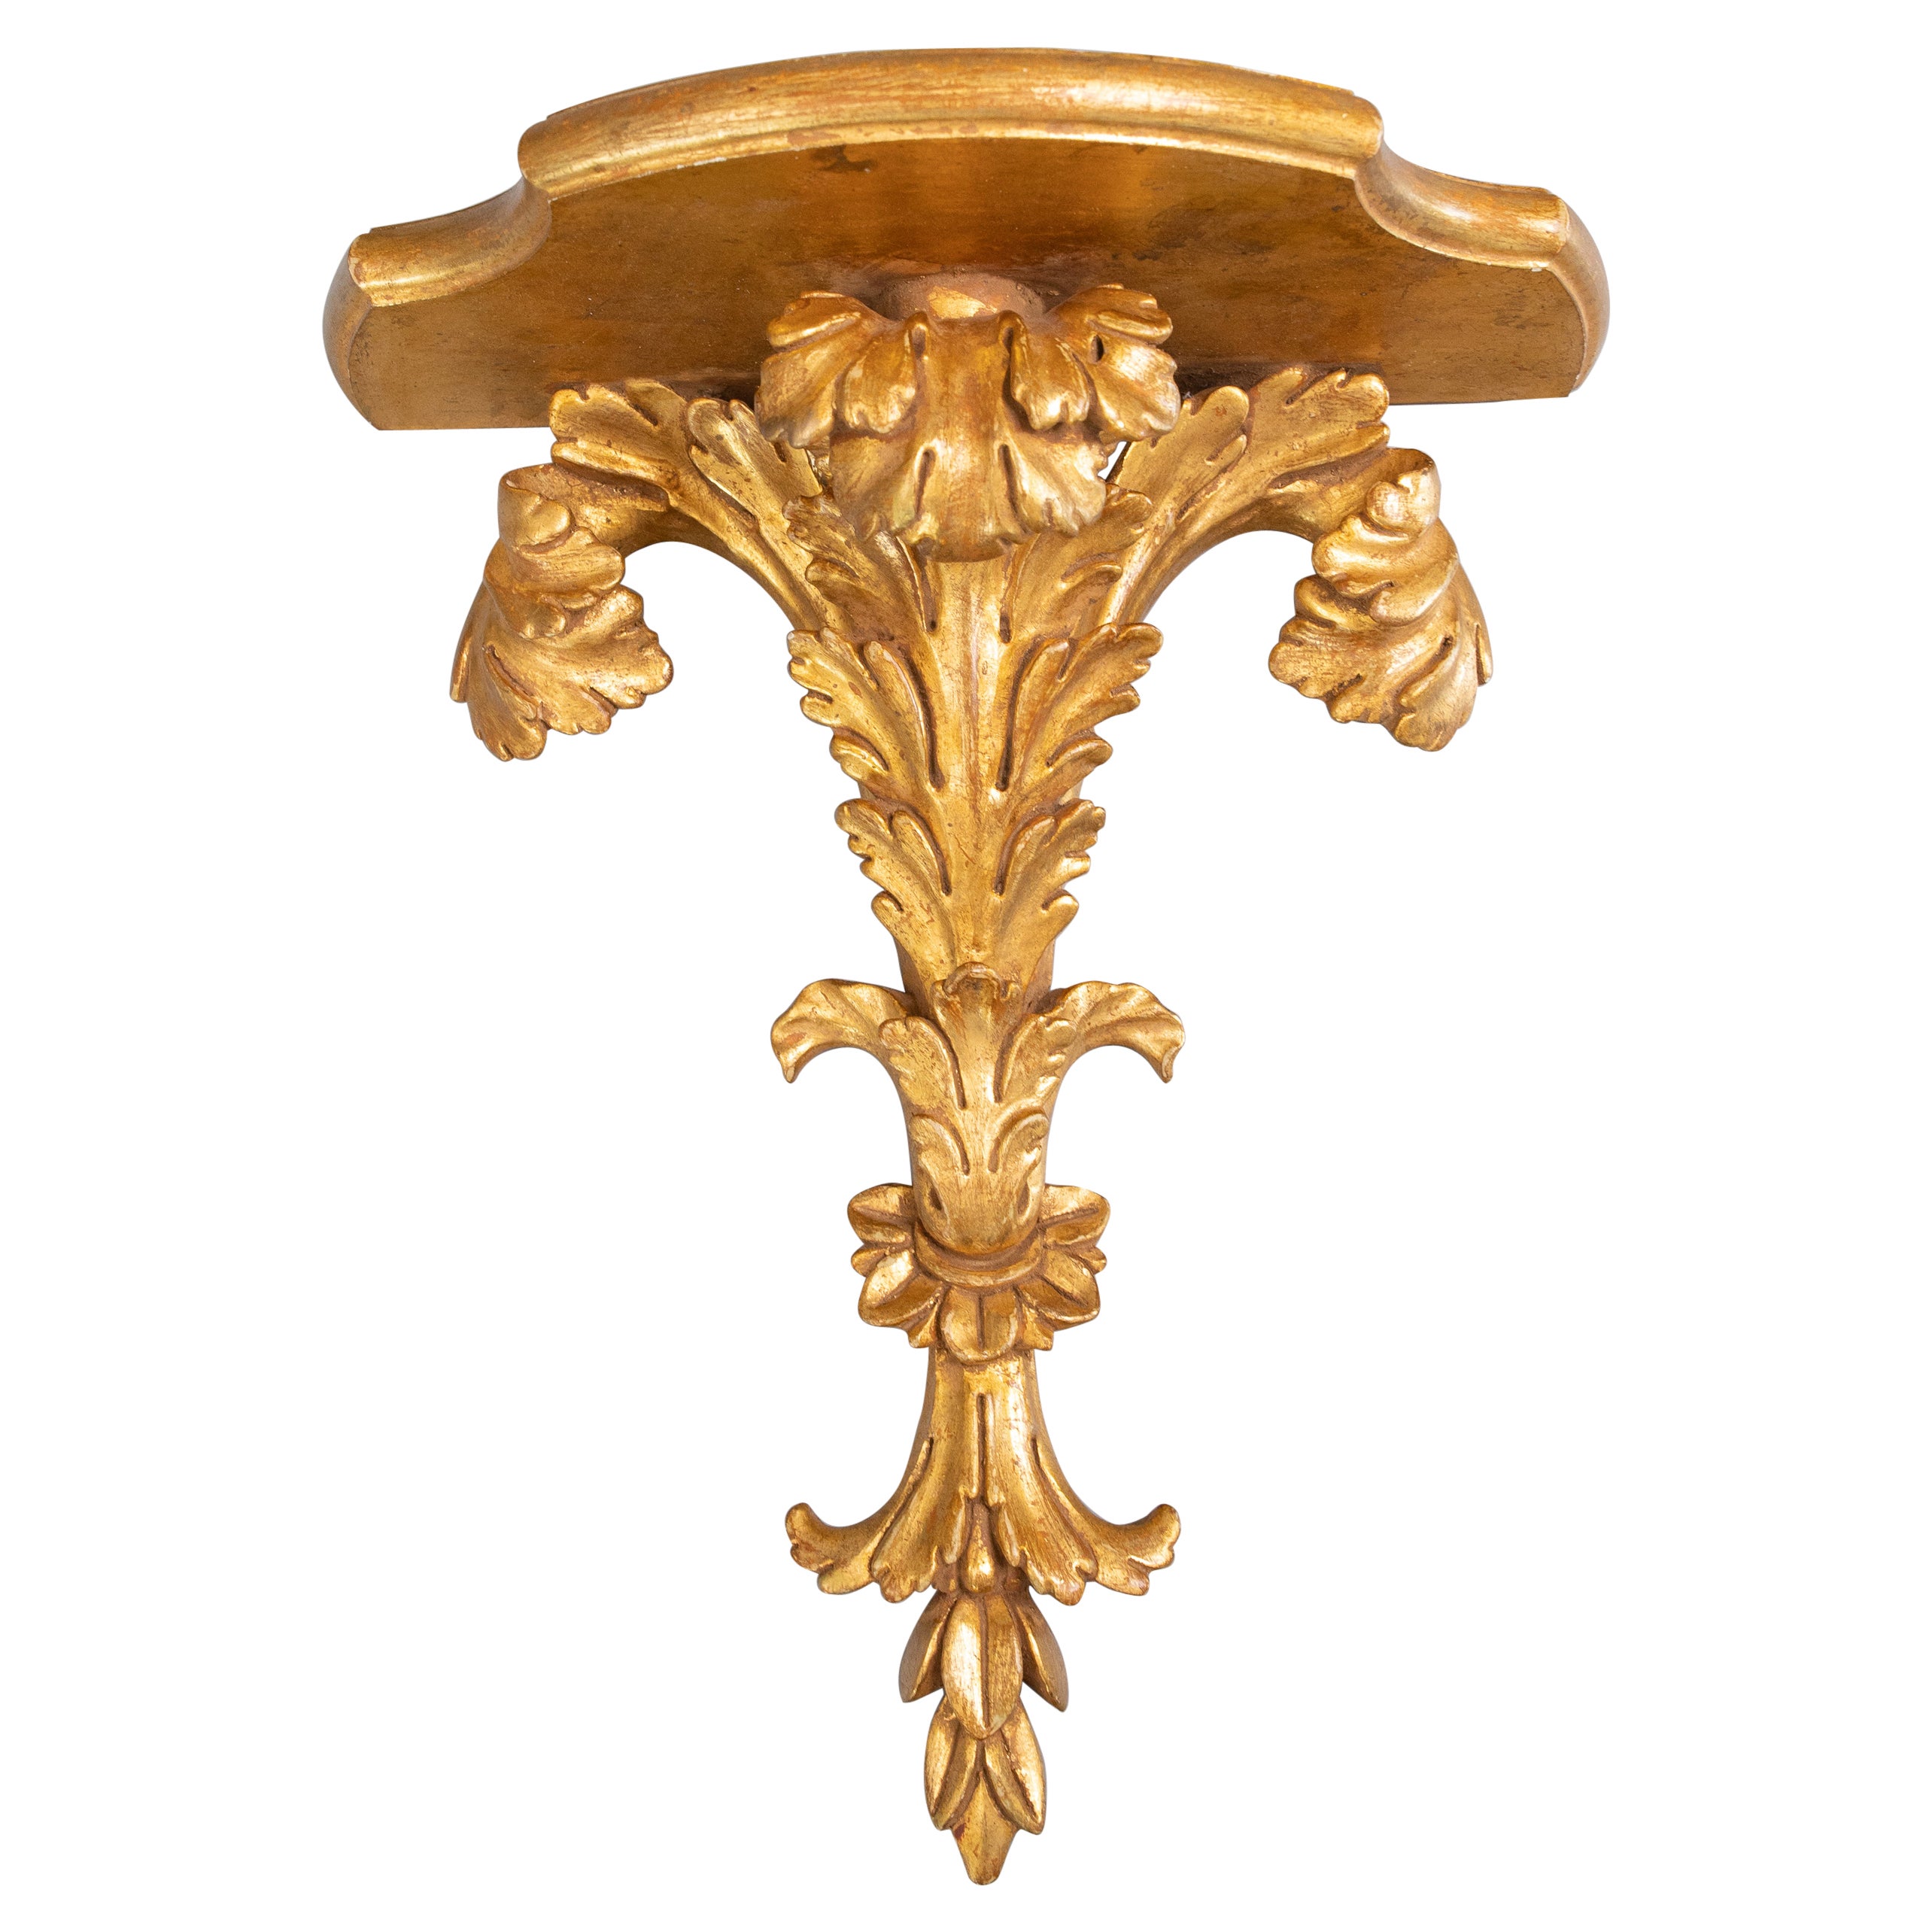 Large Mid-20th Century Italian Neoclassical Carved Giltwood Wall Bracket Shelf